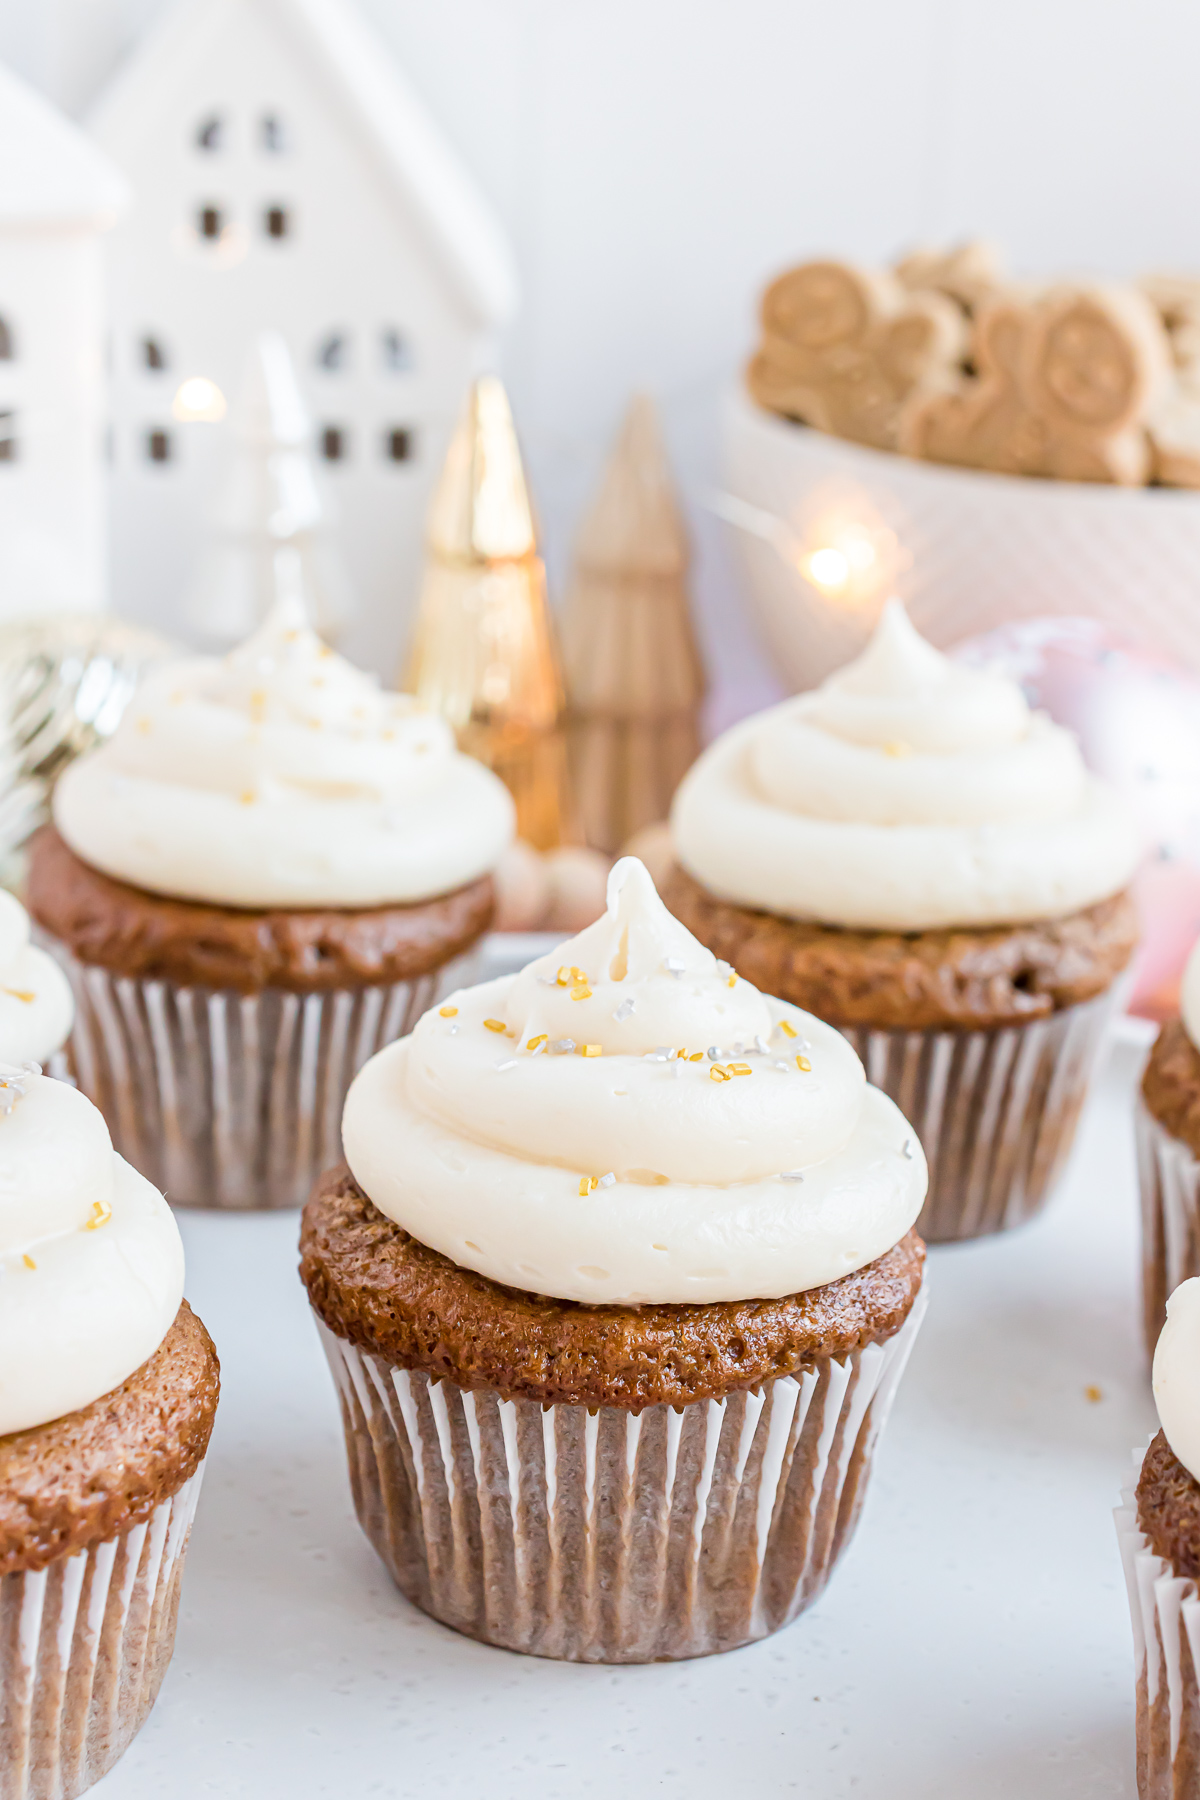 A group of 3 cupcakes made with the Gingerbread Cupcake Recipe.